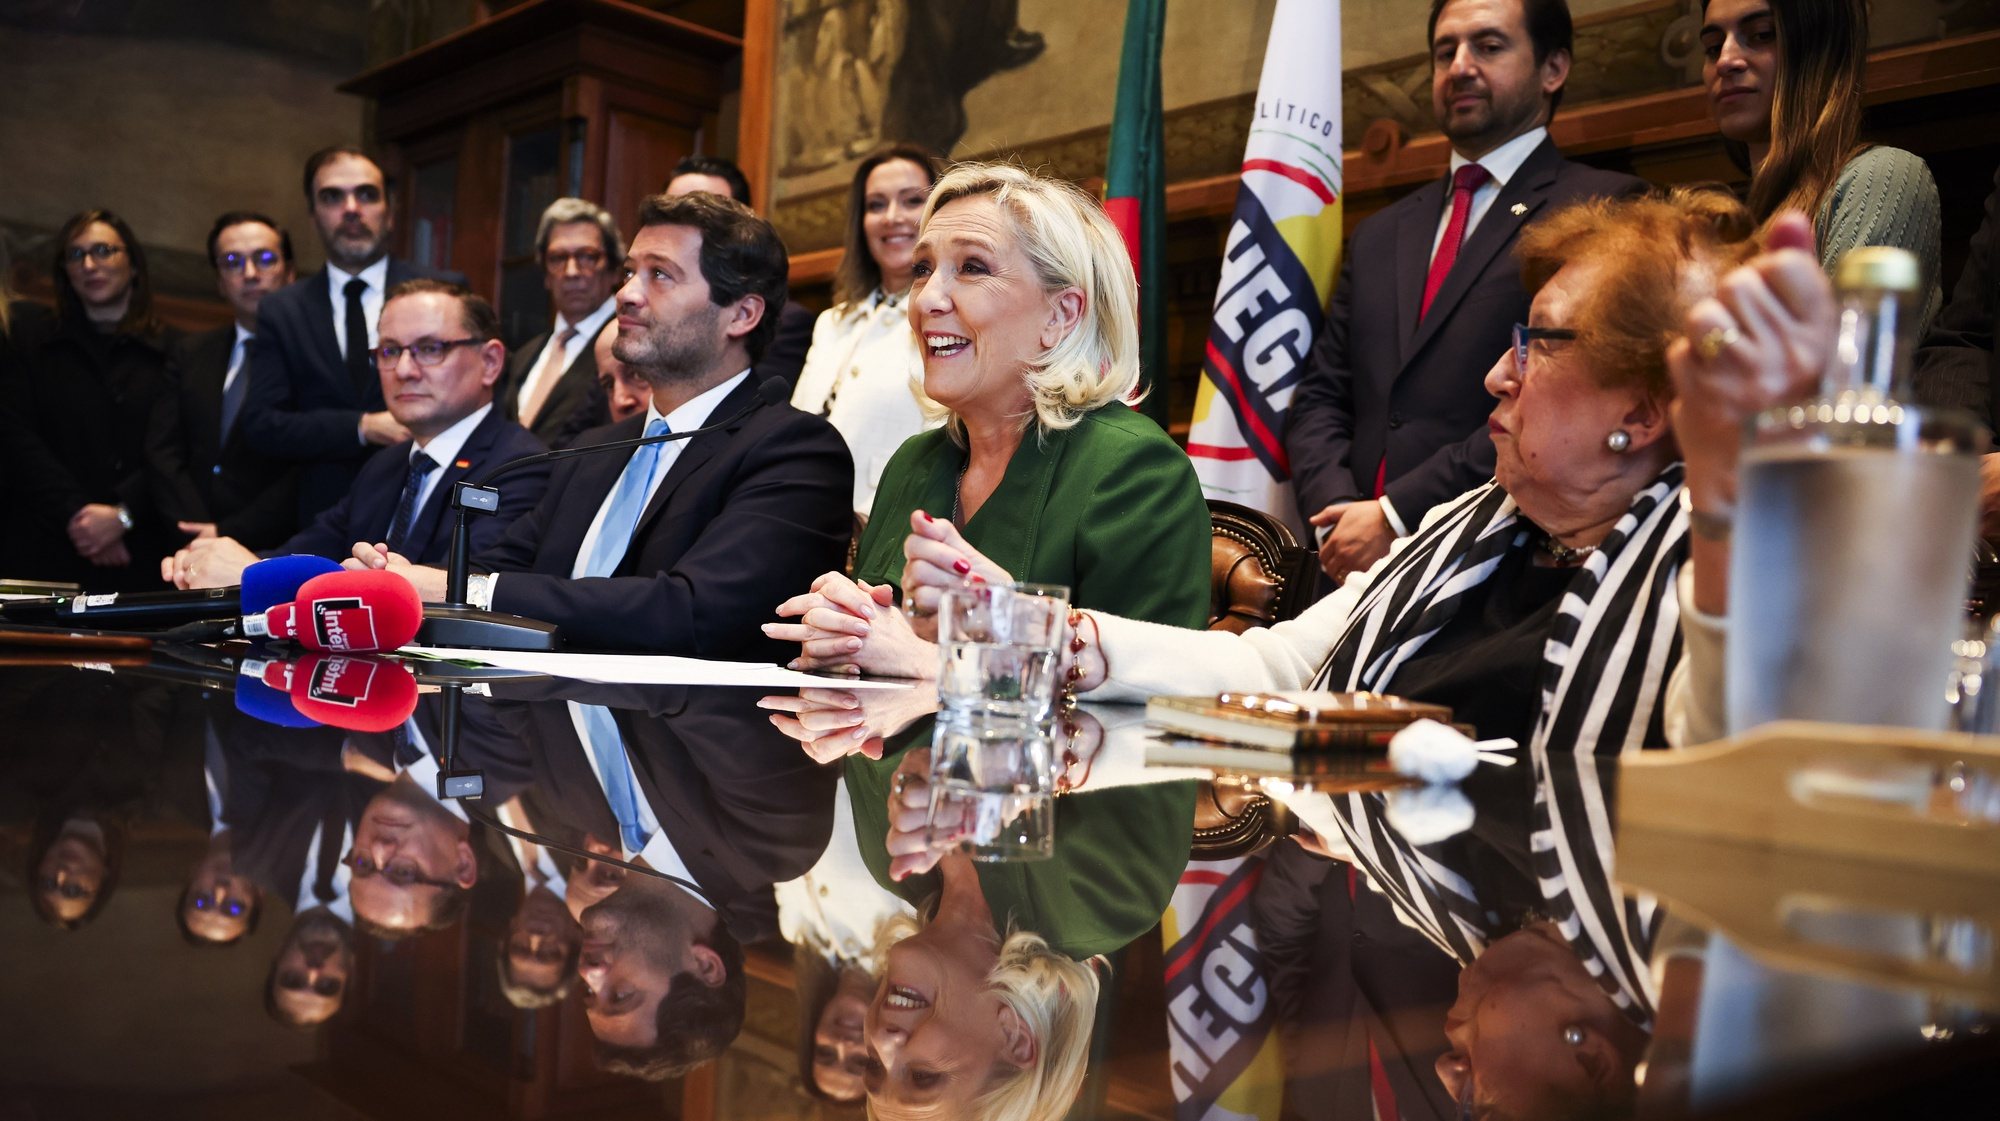 The leader of far right party Chega, Andre Ventura (C), the leader of French parliamentary group from Rassemblement National, Marine Le Pen (2-R), and the German politician of the far-right Alternative for Germany (AfD ) Tino Chrupalla (L), during a joint press conference held at the Portuguese Parliament, in Lisbon, Portugal, 24 November 2023. JOSE SENA GOULAO/LUSA